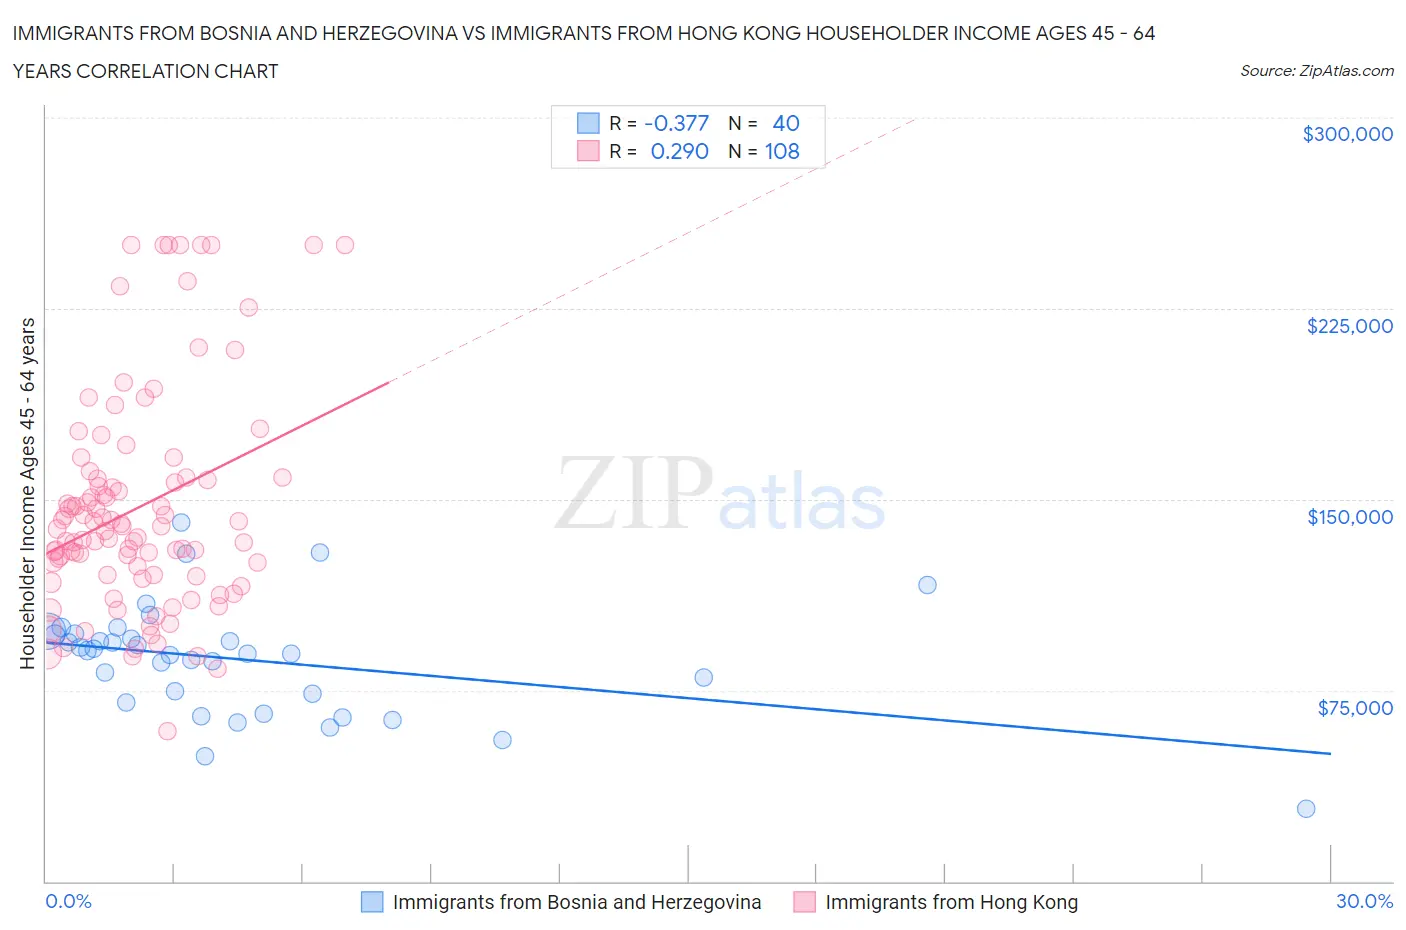 Immigrants from Bosnia and Herzegovina vs Immigrants from Hong Kong Householder Income Ages 45 - 64 years